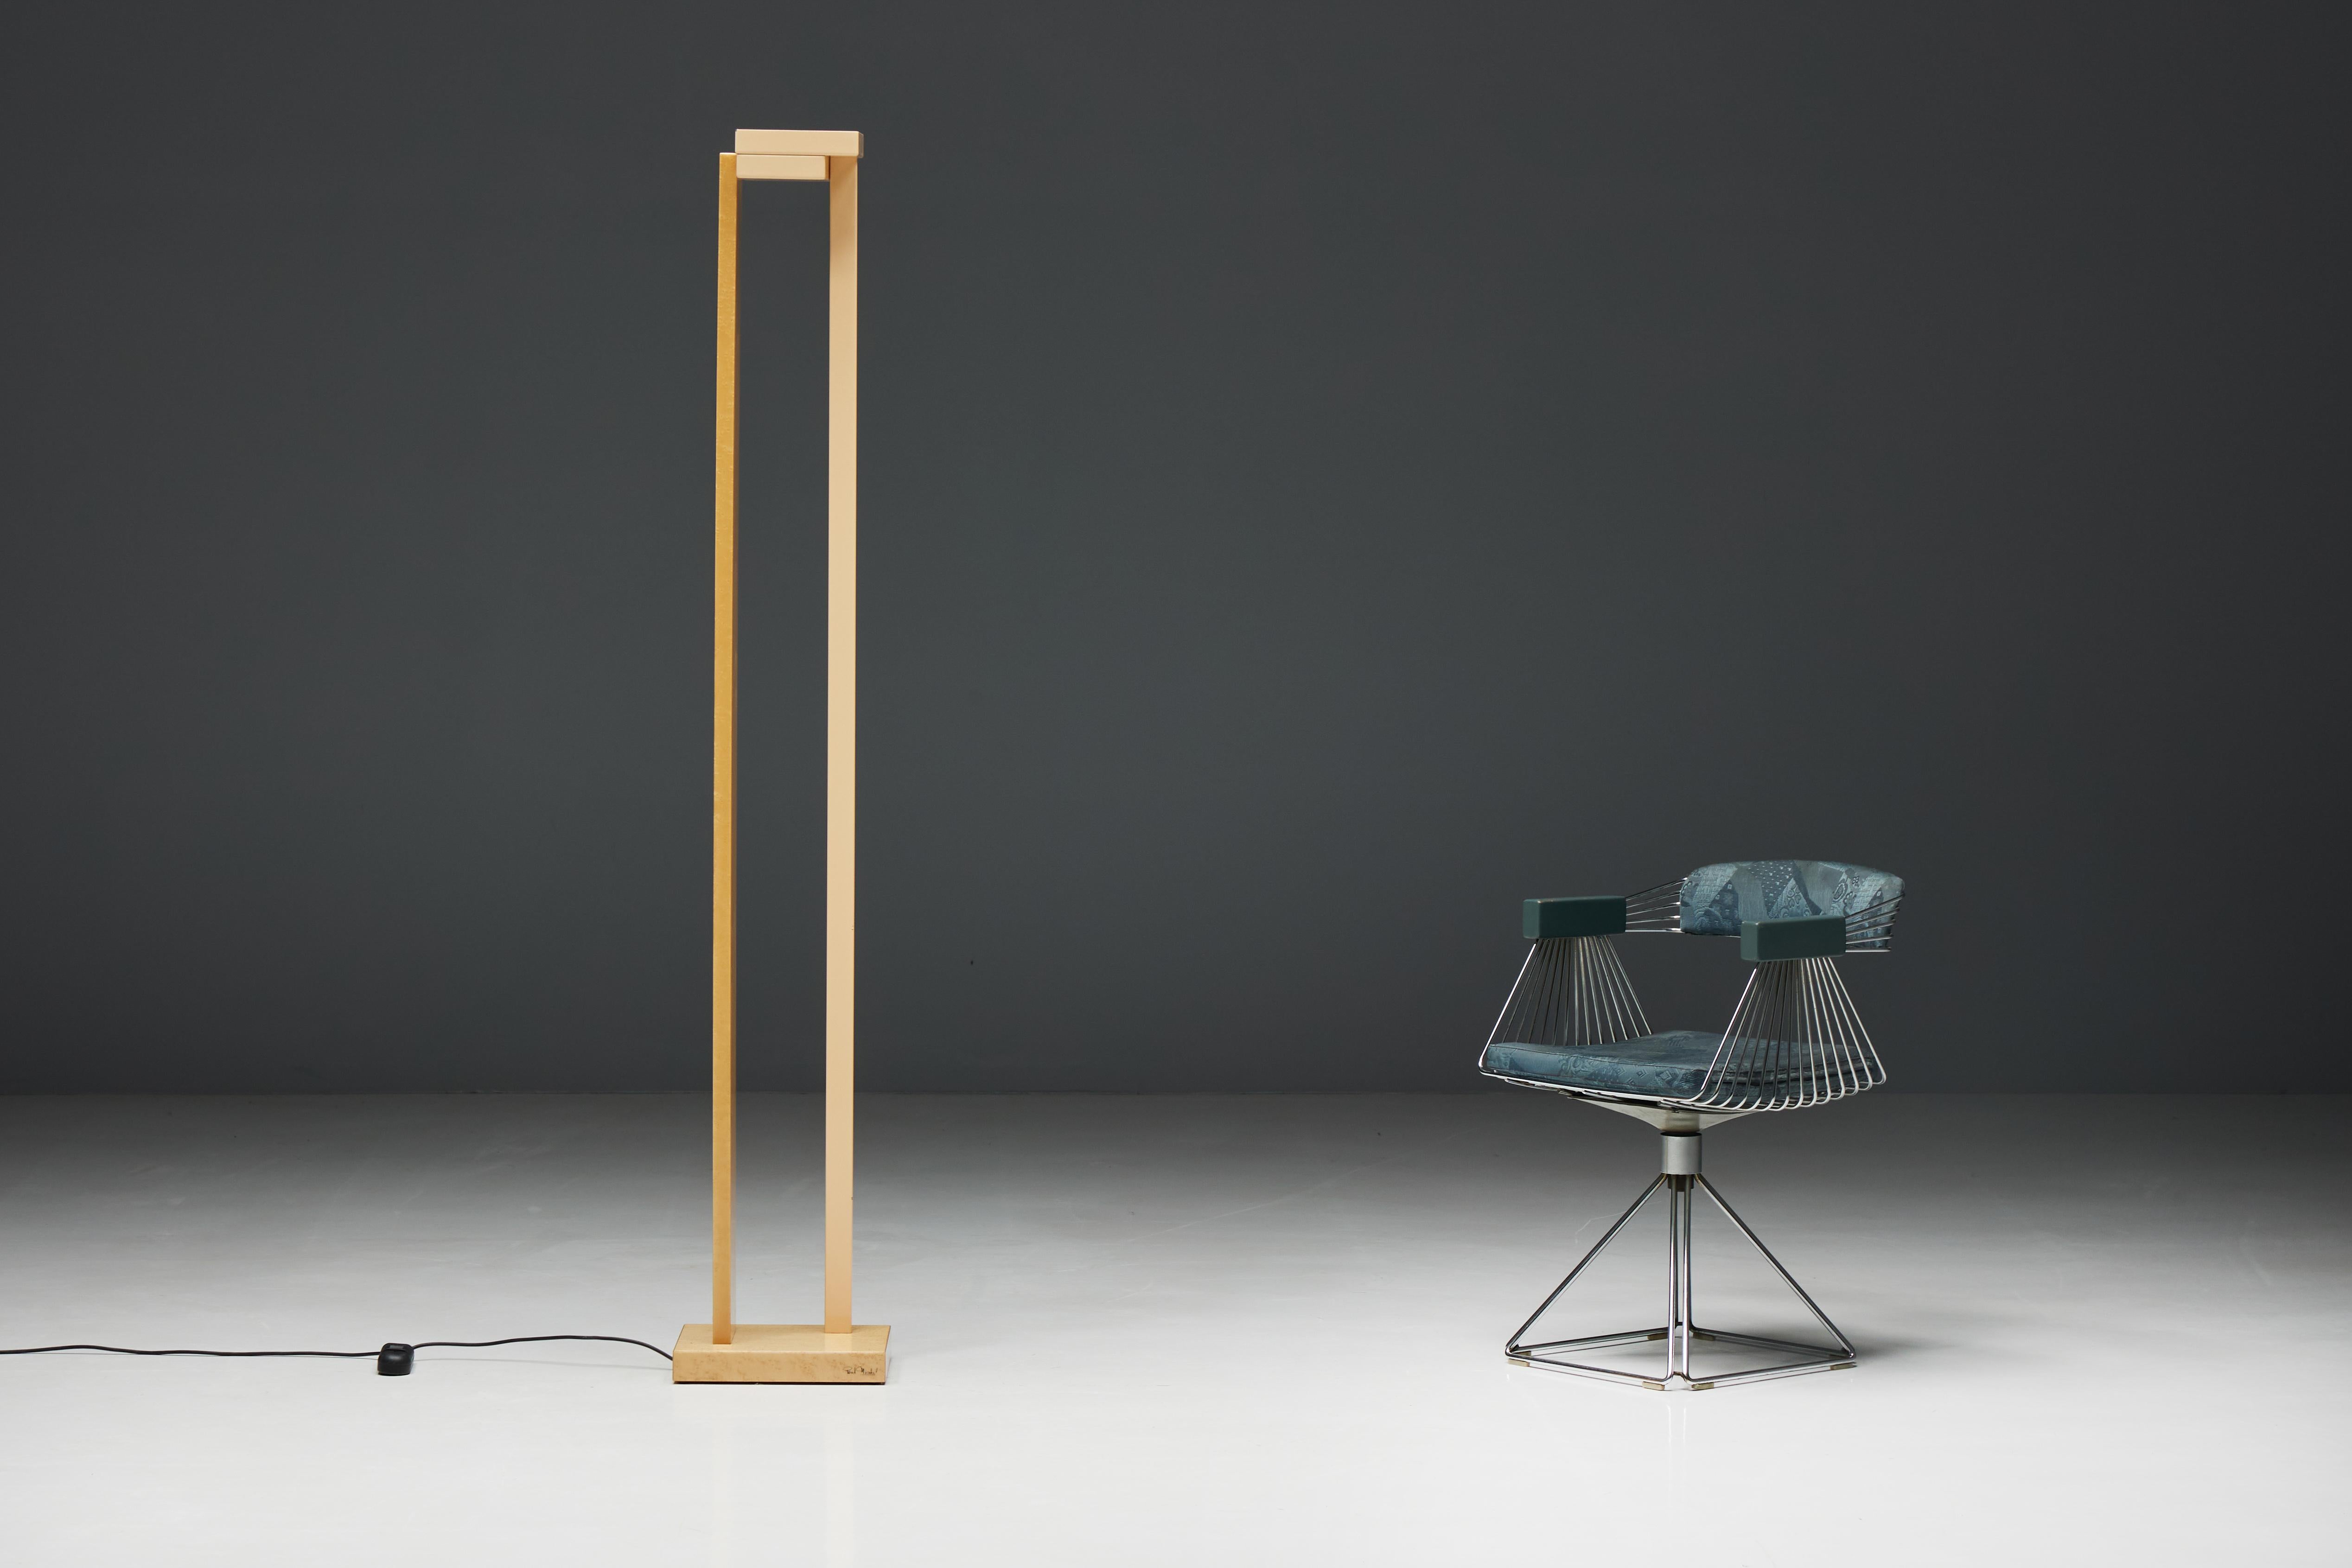 Two-tone tall floor lamp by Paul Michel, crafted with birds eye maple veneer and cream lacquer. Michel's design philosophy is rooted in the art of minimalism, where every element serves a purpose. This lamp is a testament to that ethos, with its